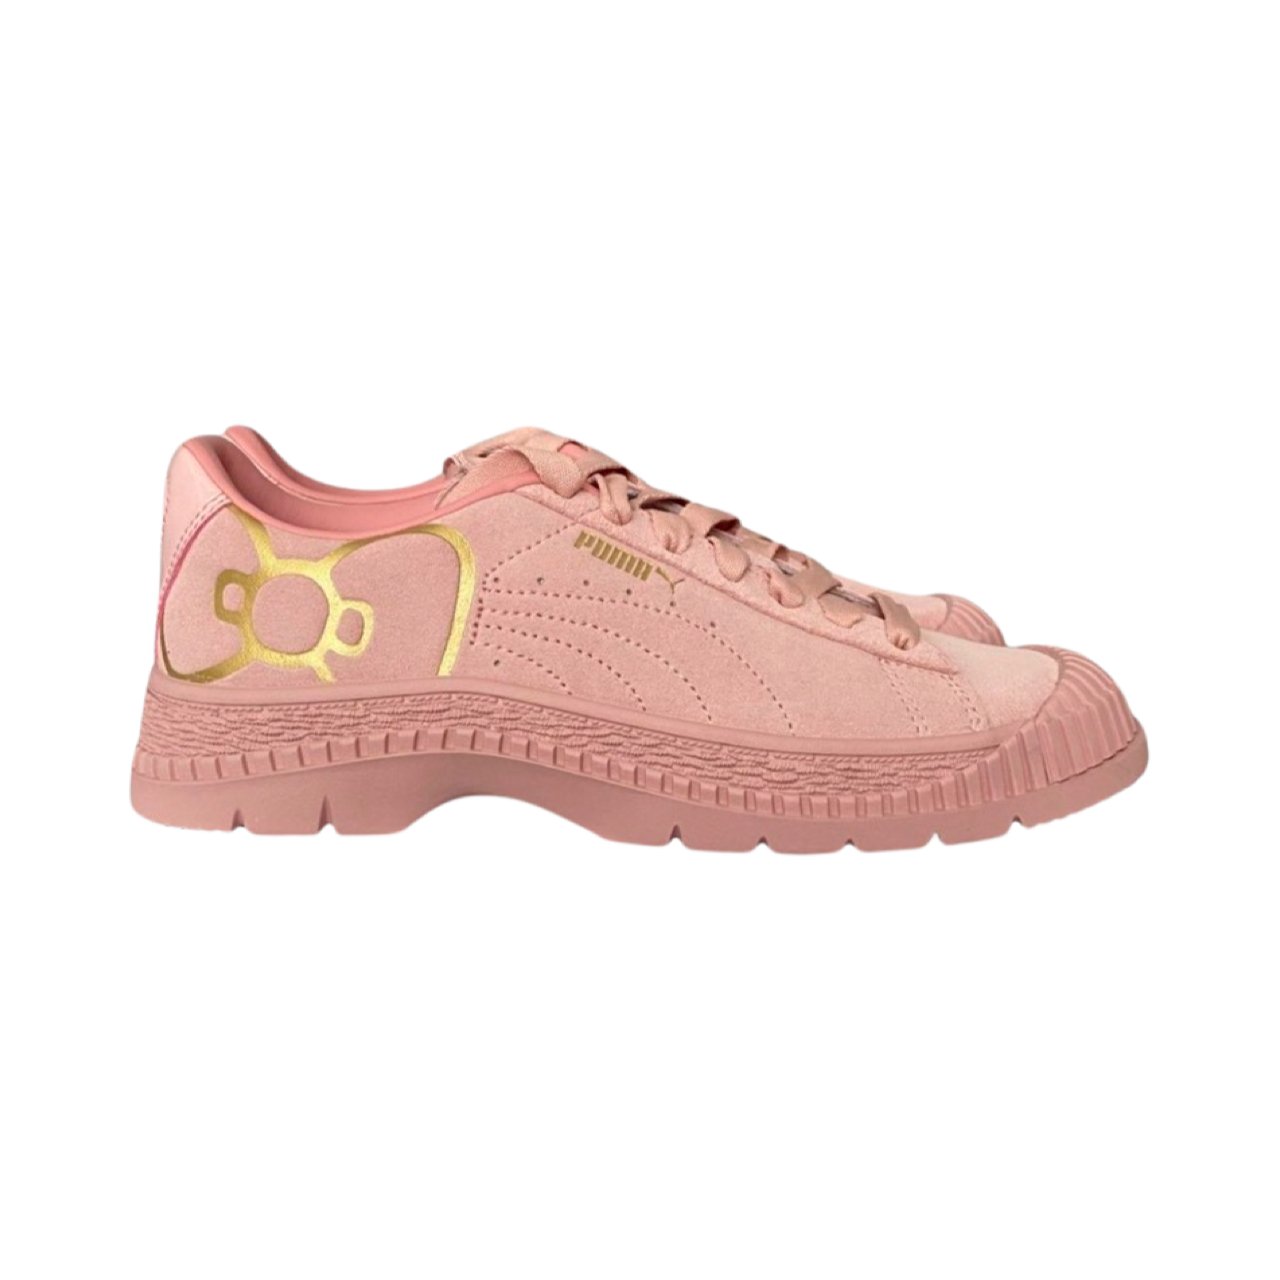 Hello Kitty x Puma Collaboration Utility Women Trainers in Pink and Gold - Soul and Sense Streetwear